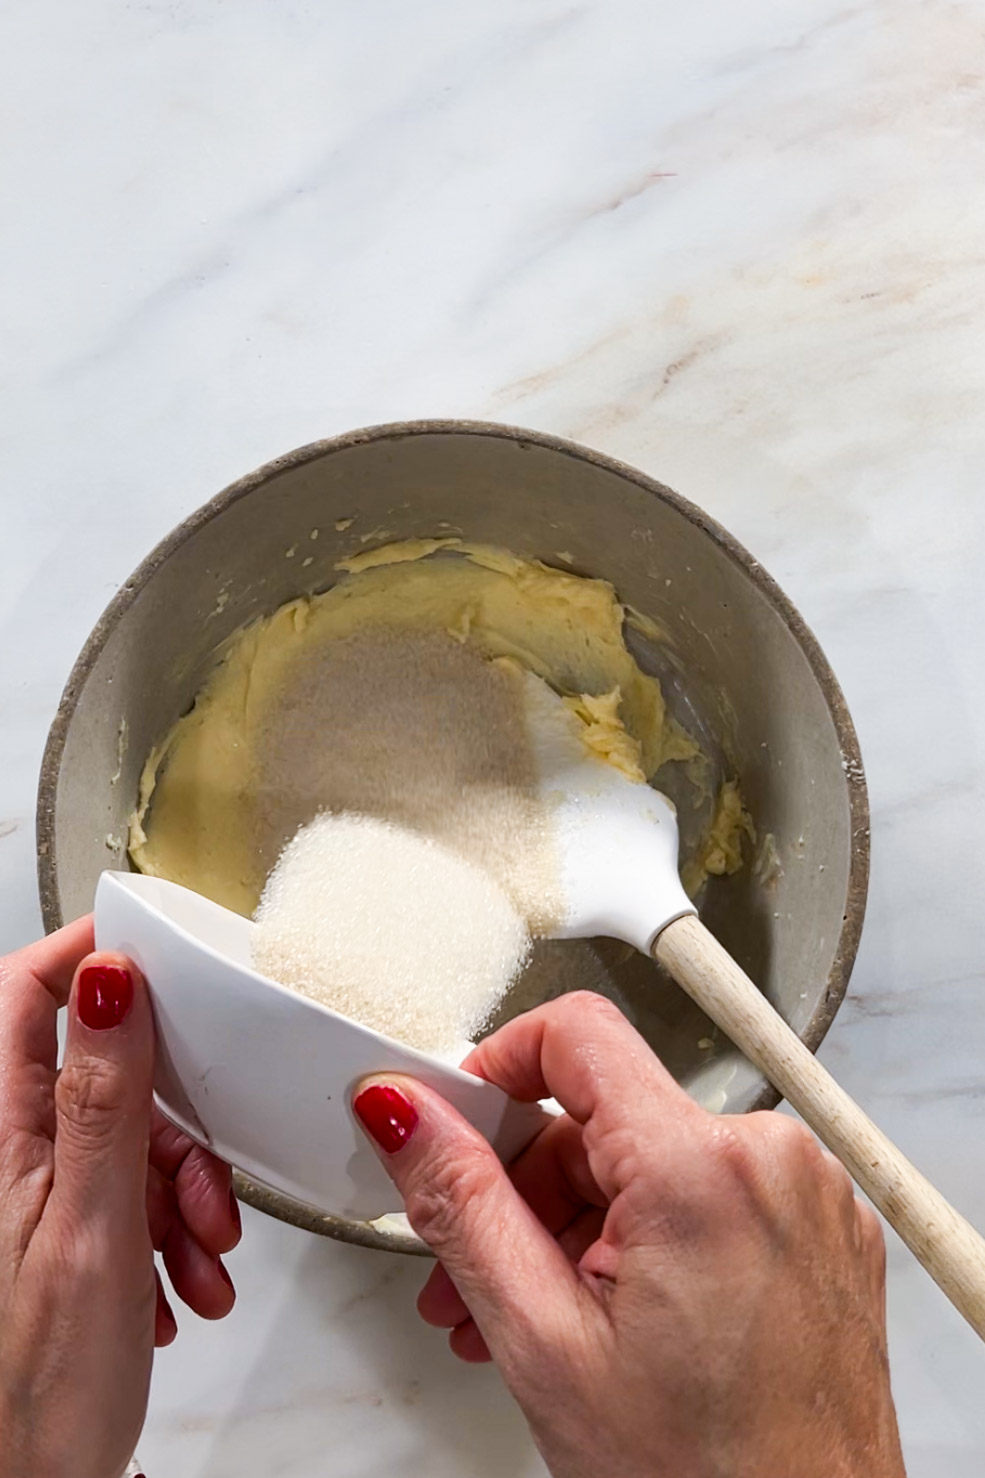 A person mixing sugar and flour in a bowl to make delicious cookies.